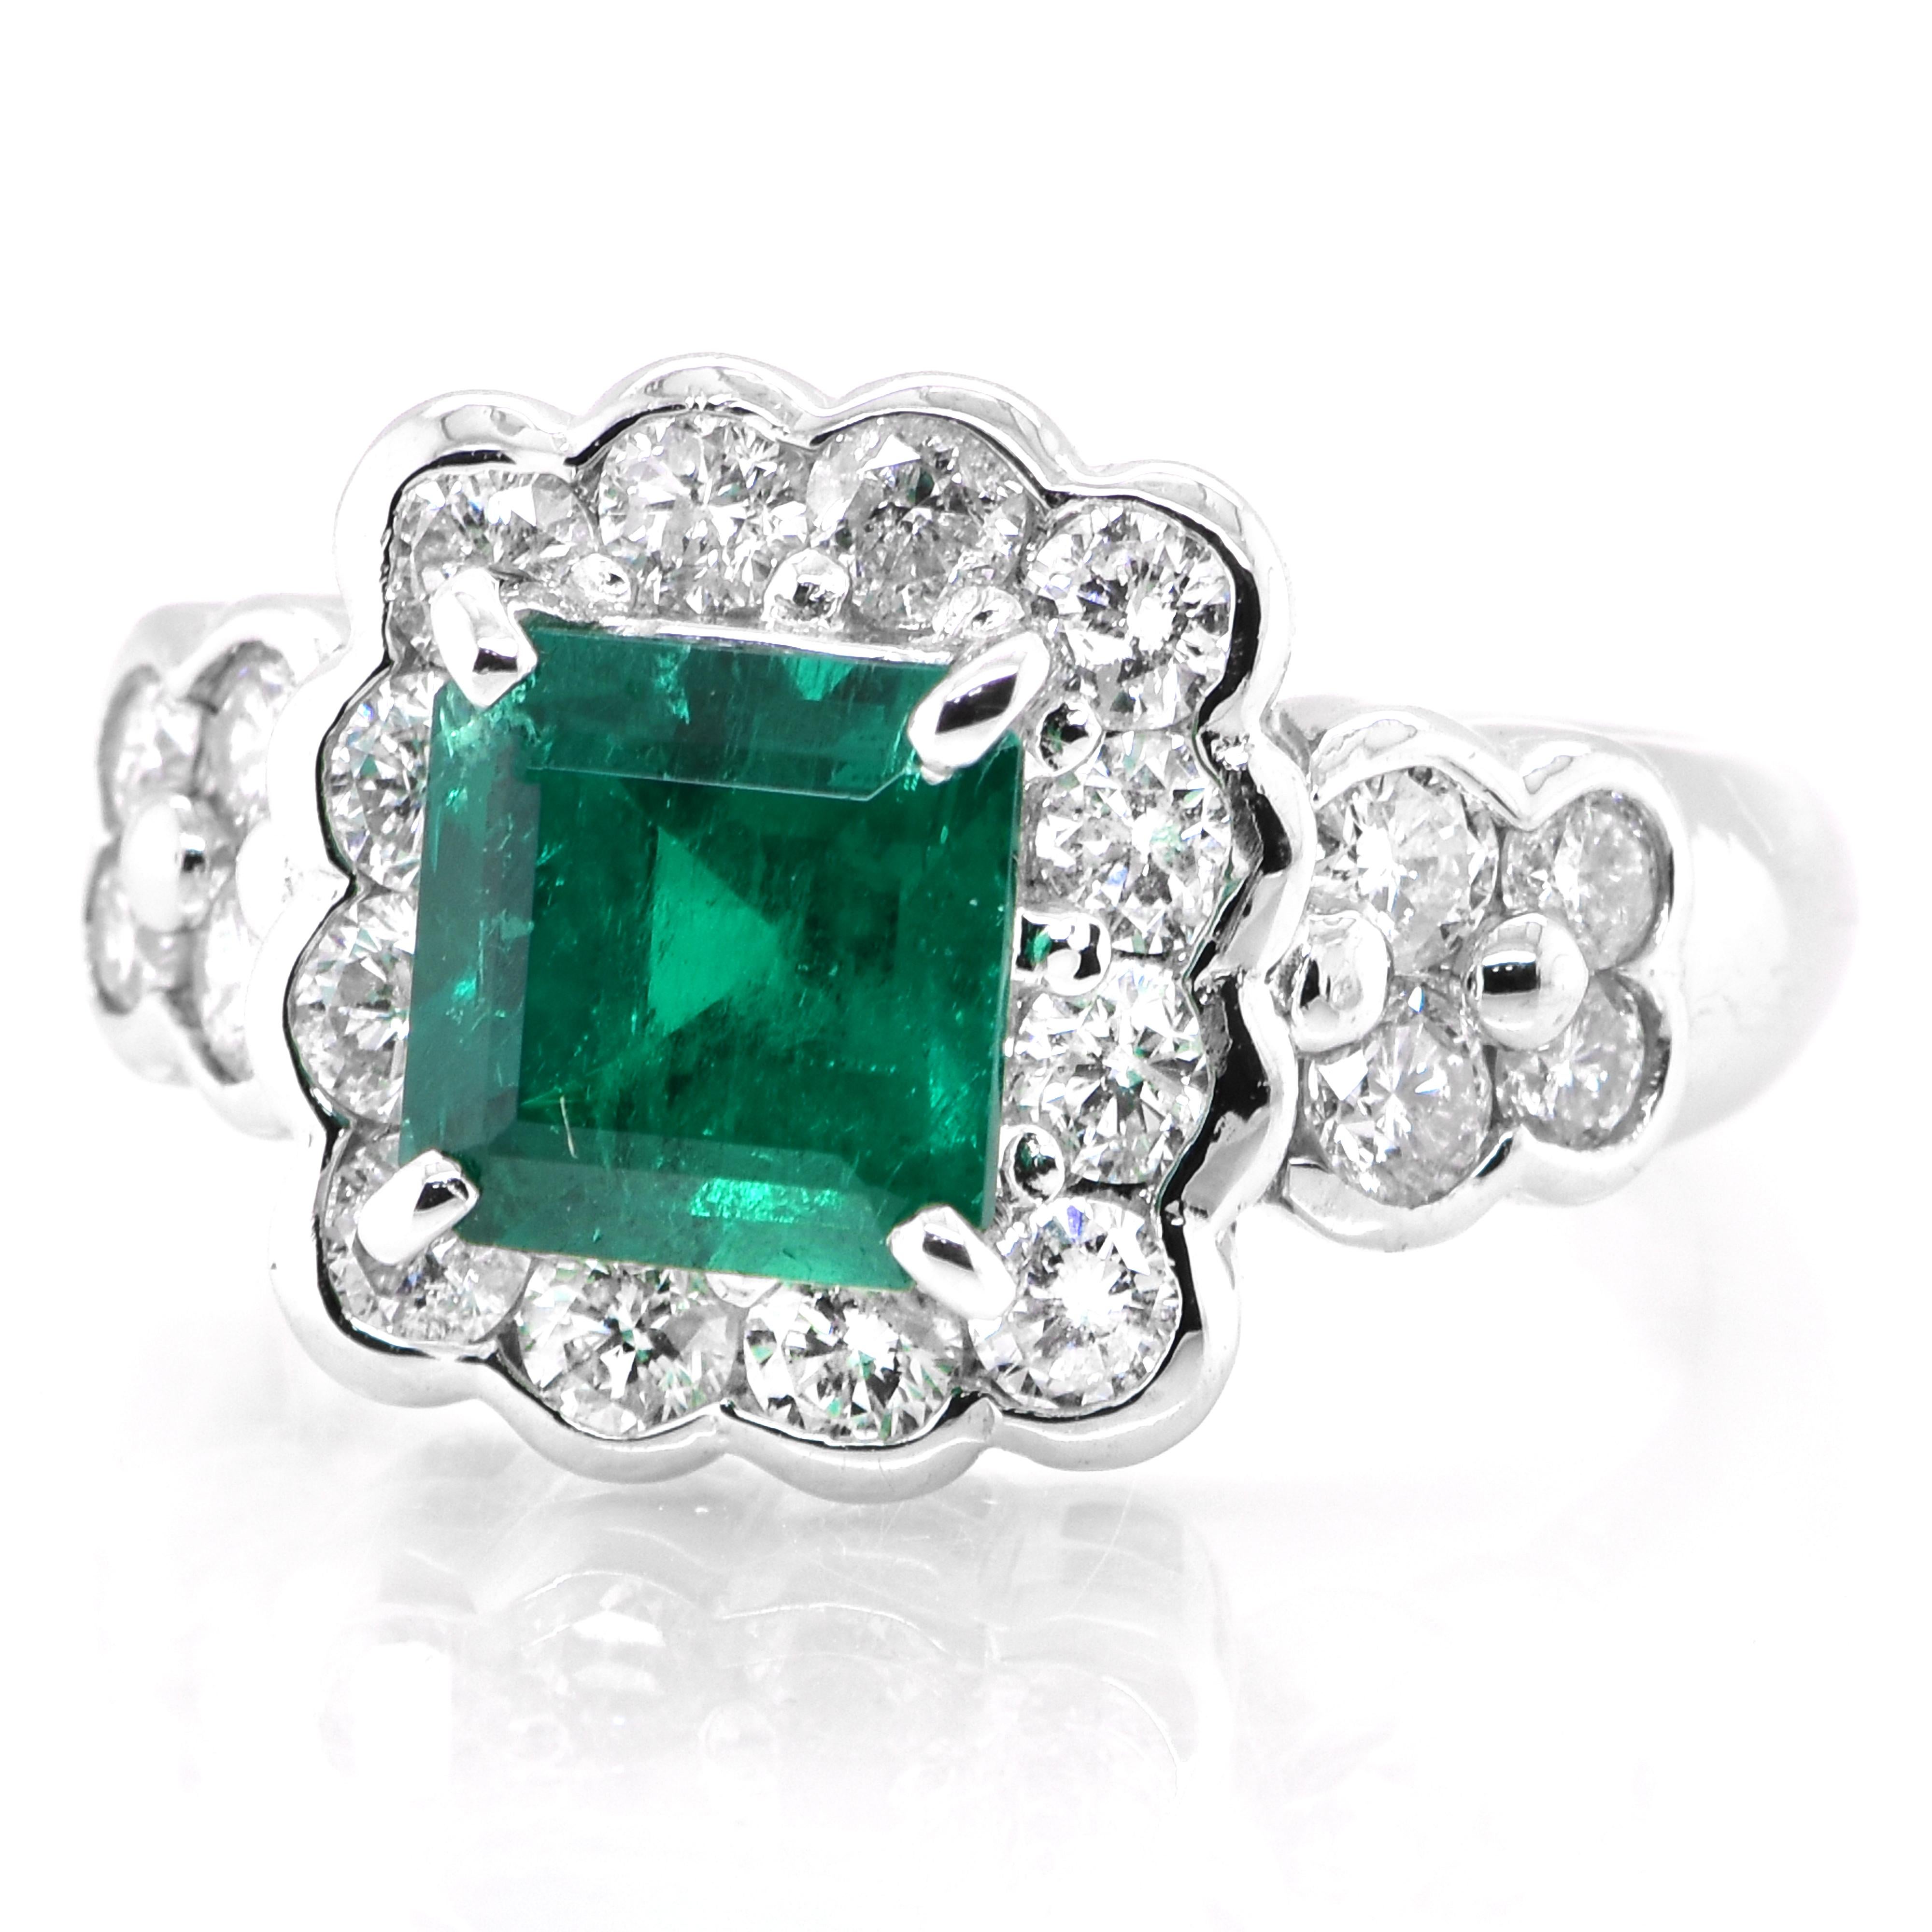 A stunning ring featuring a 1.87 Carat Natural Emerald and 1.33 Carats of Diamond Accents set in Platinum. People have admired emerald’s green for thousands of years. Emeralds have always been associated with the lushest landscapes and the richest